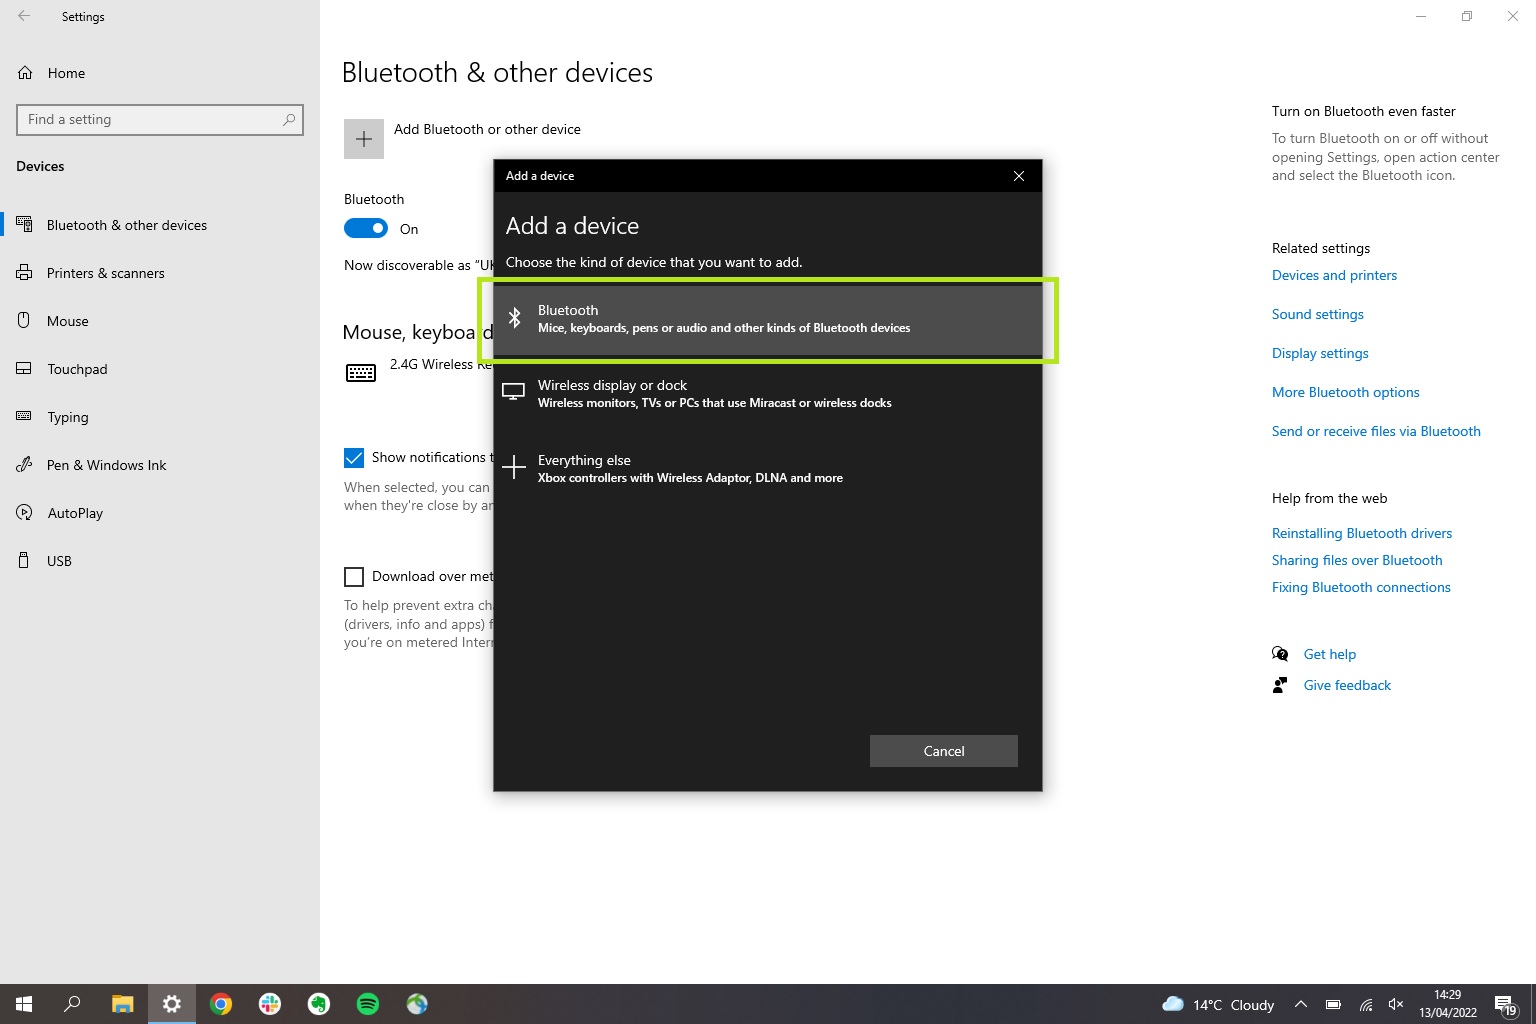 A screenshot showing the Windows 10 Bluetooth menu demonstrating how to connect AirPods to PC